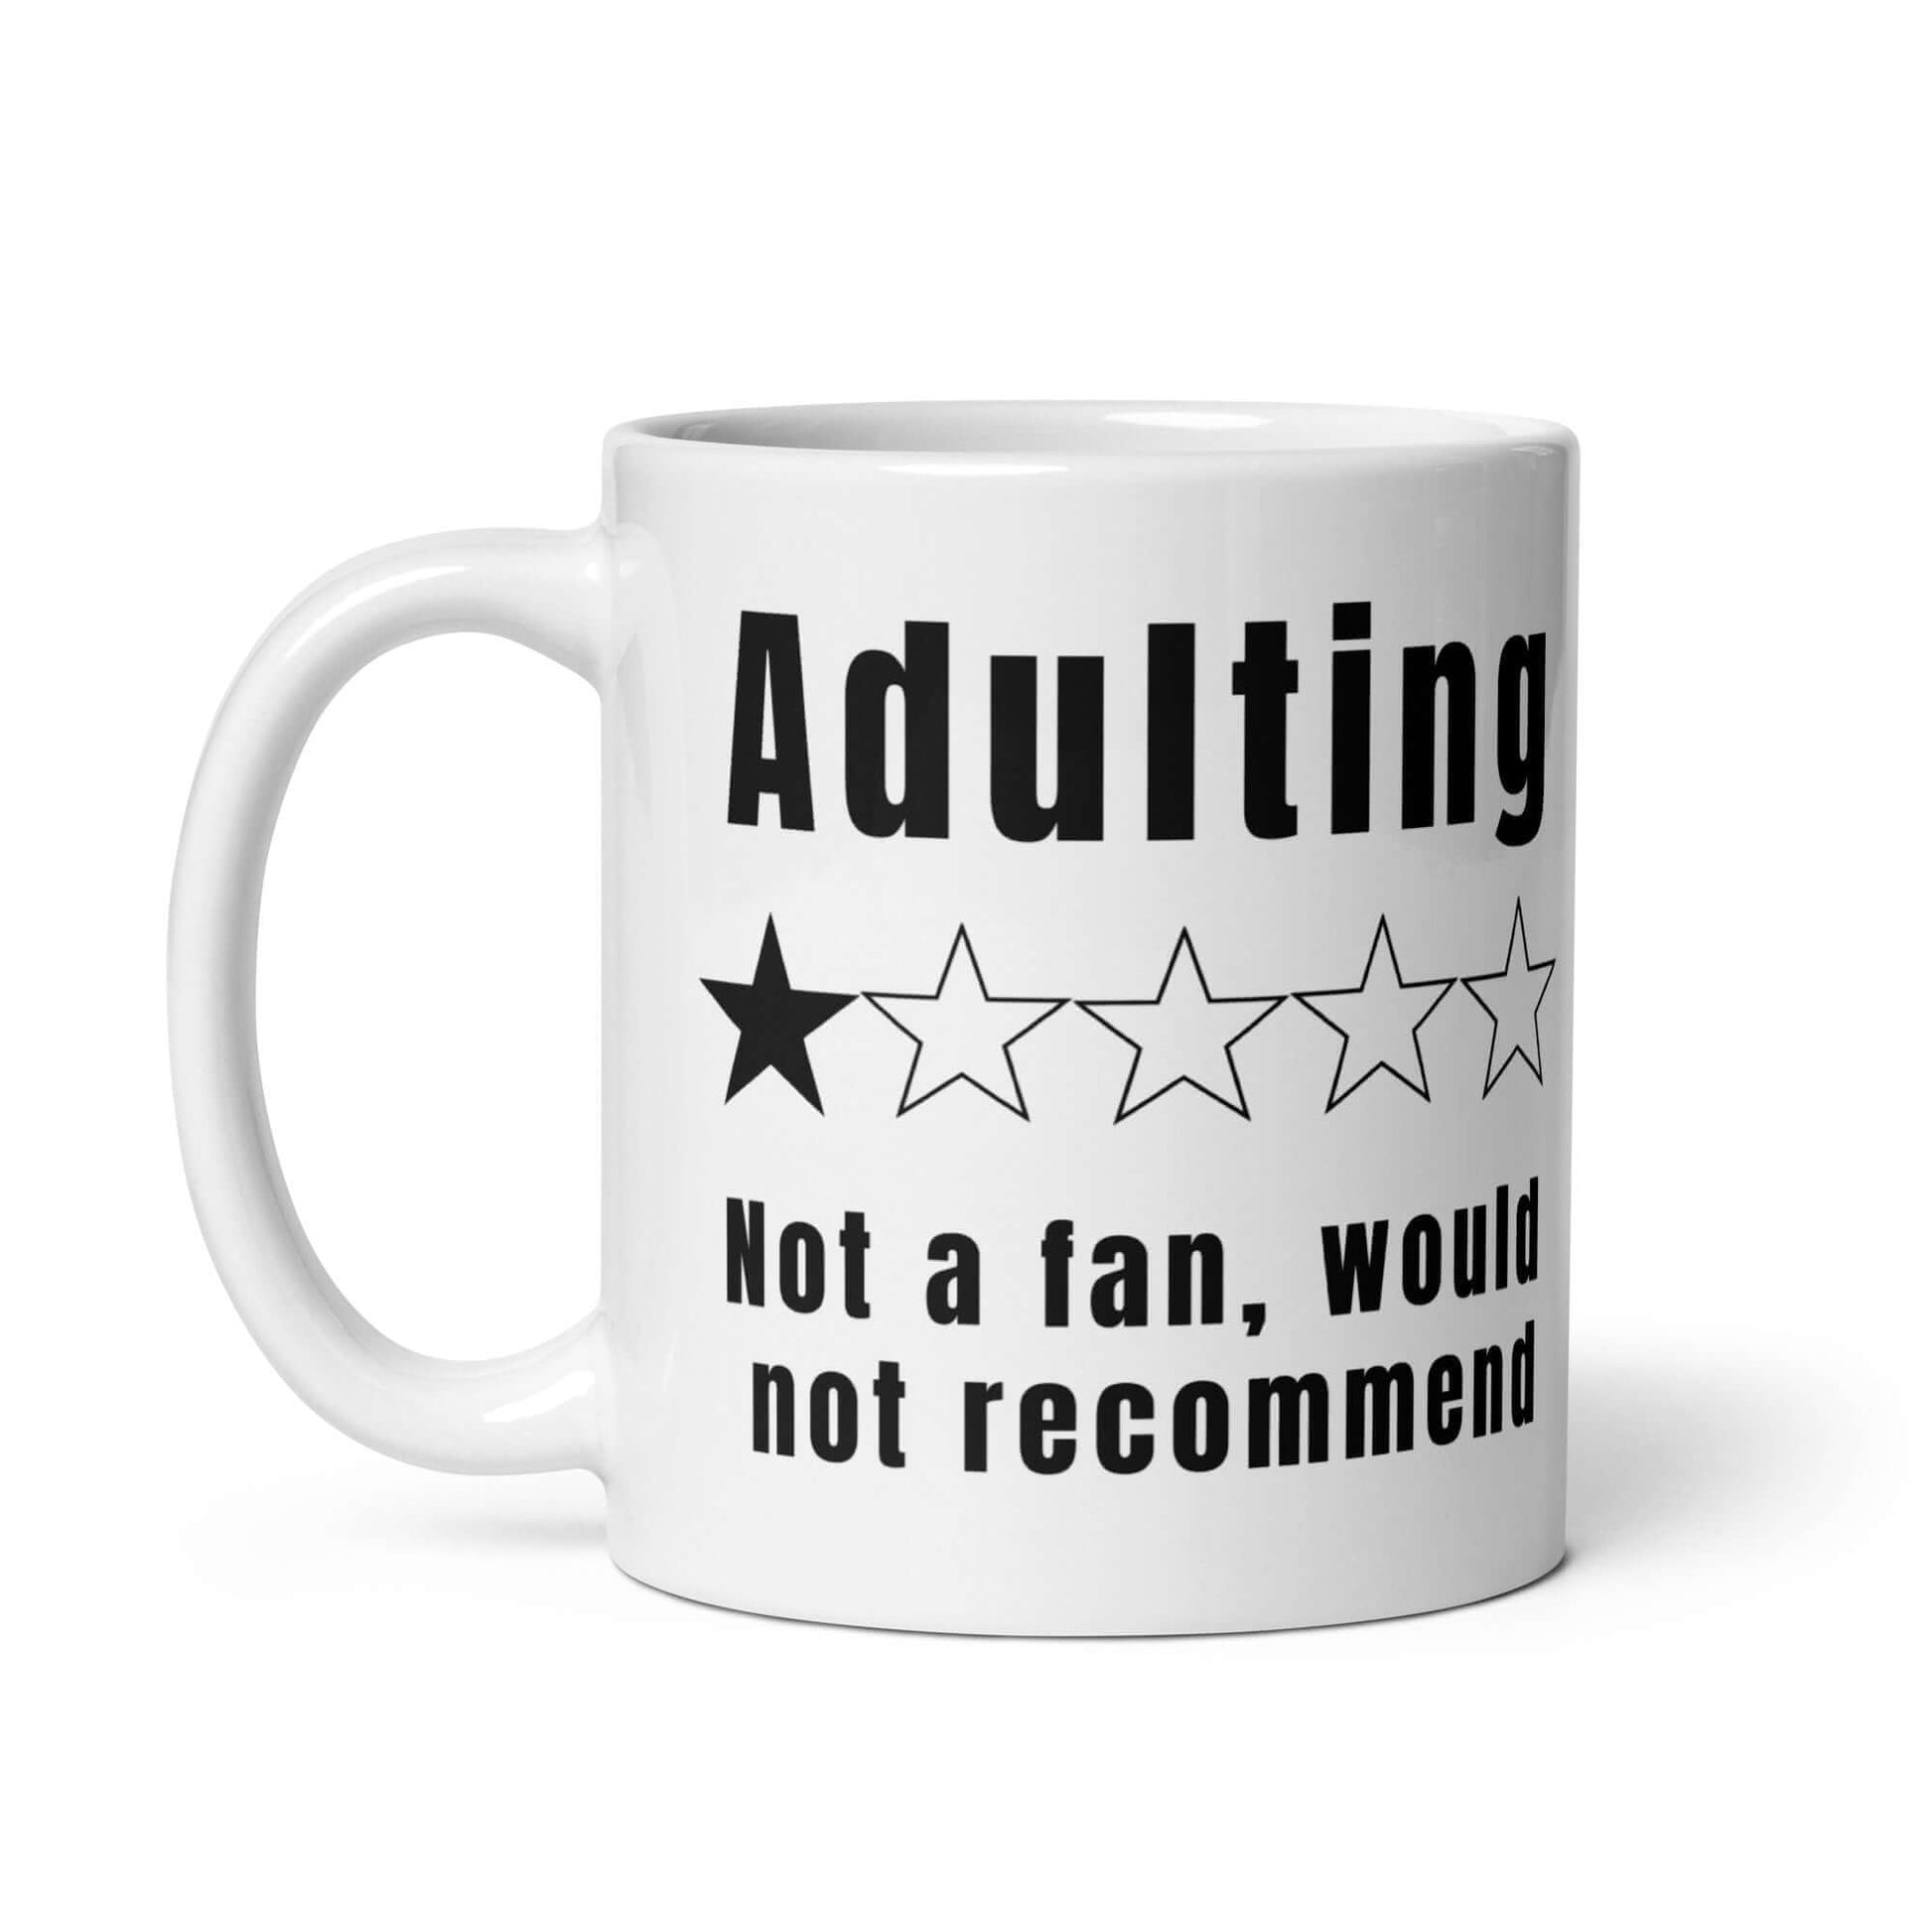 Adulting - Not a fan would not recommend - White glossy mug - Horrible Designs